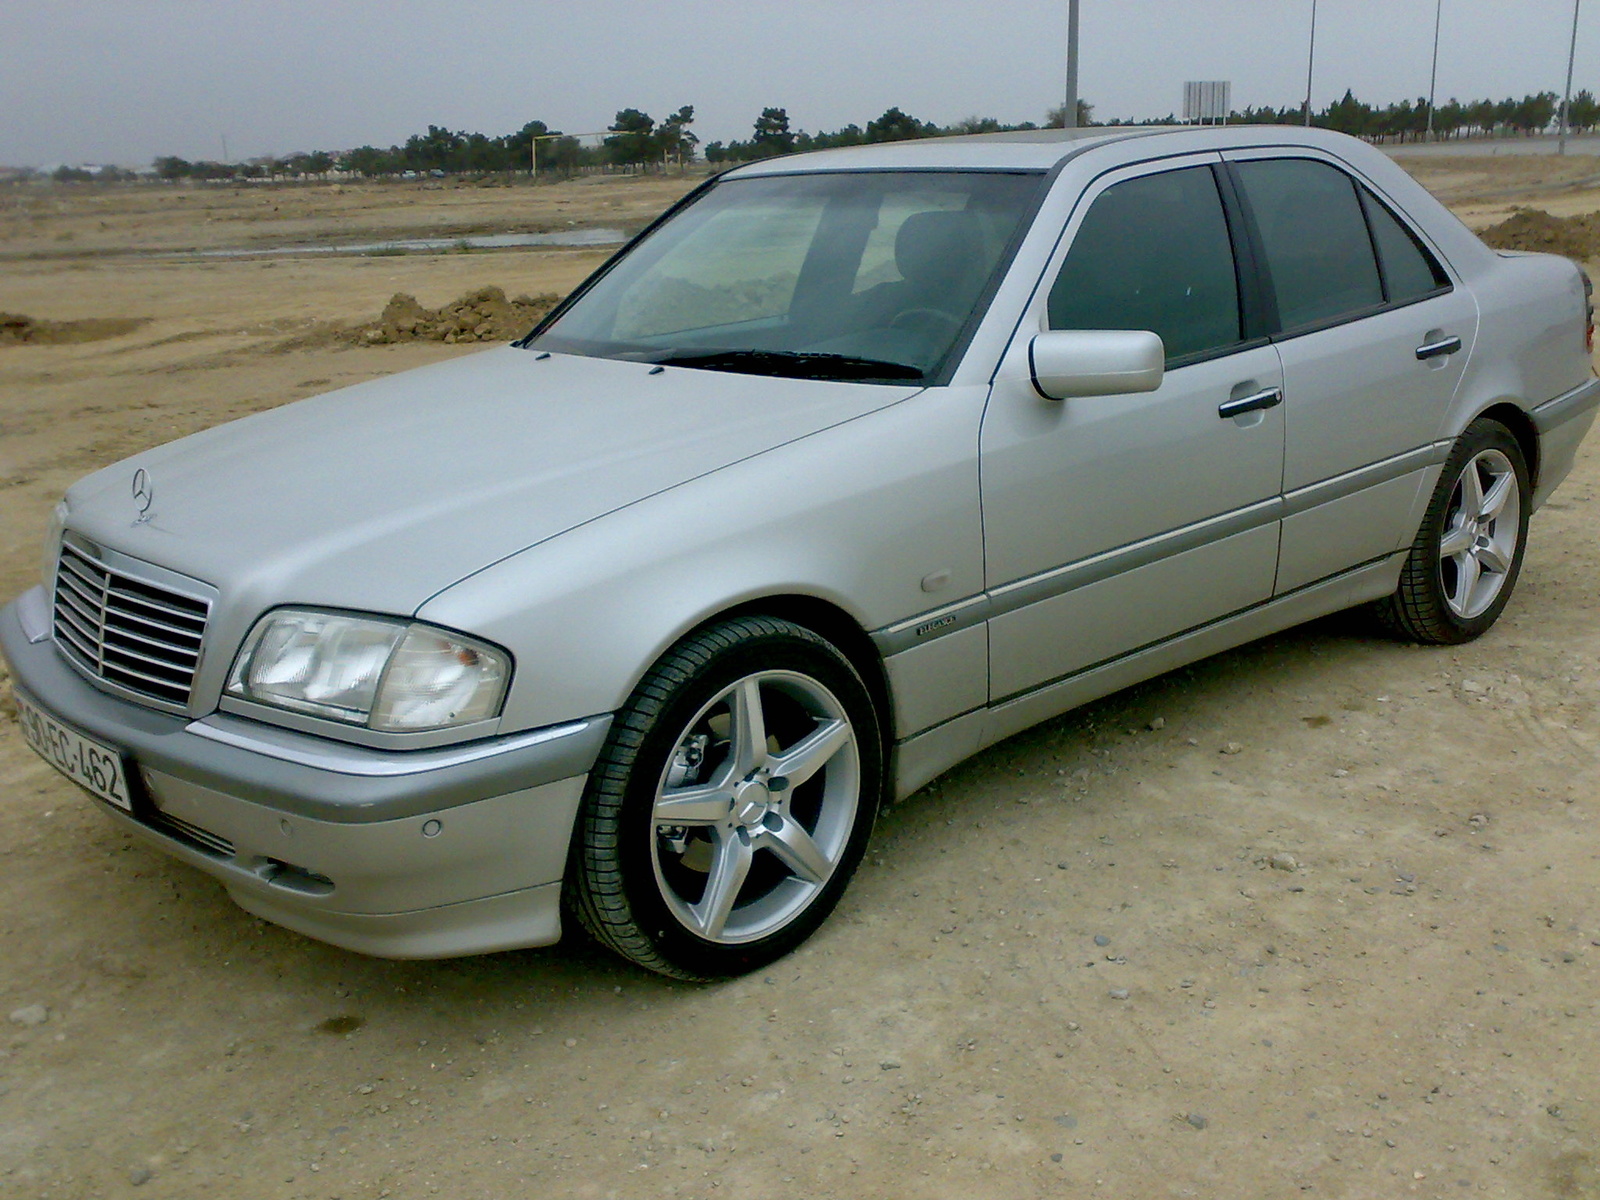 Mercedes Benz C Class Owners manual 2000 - Free Download ...